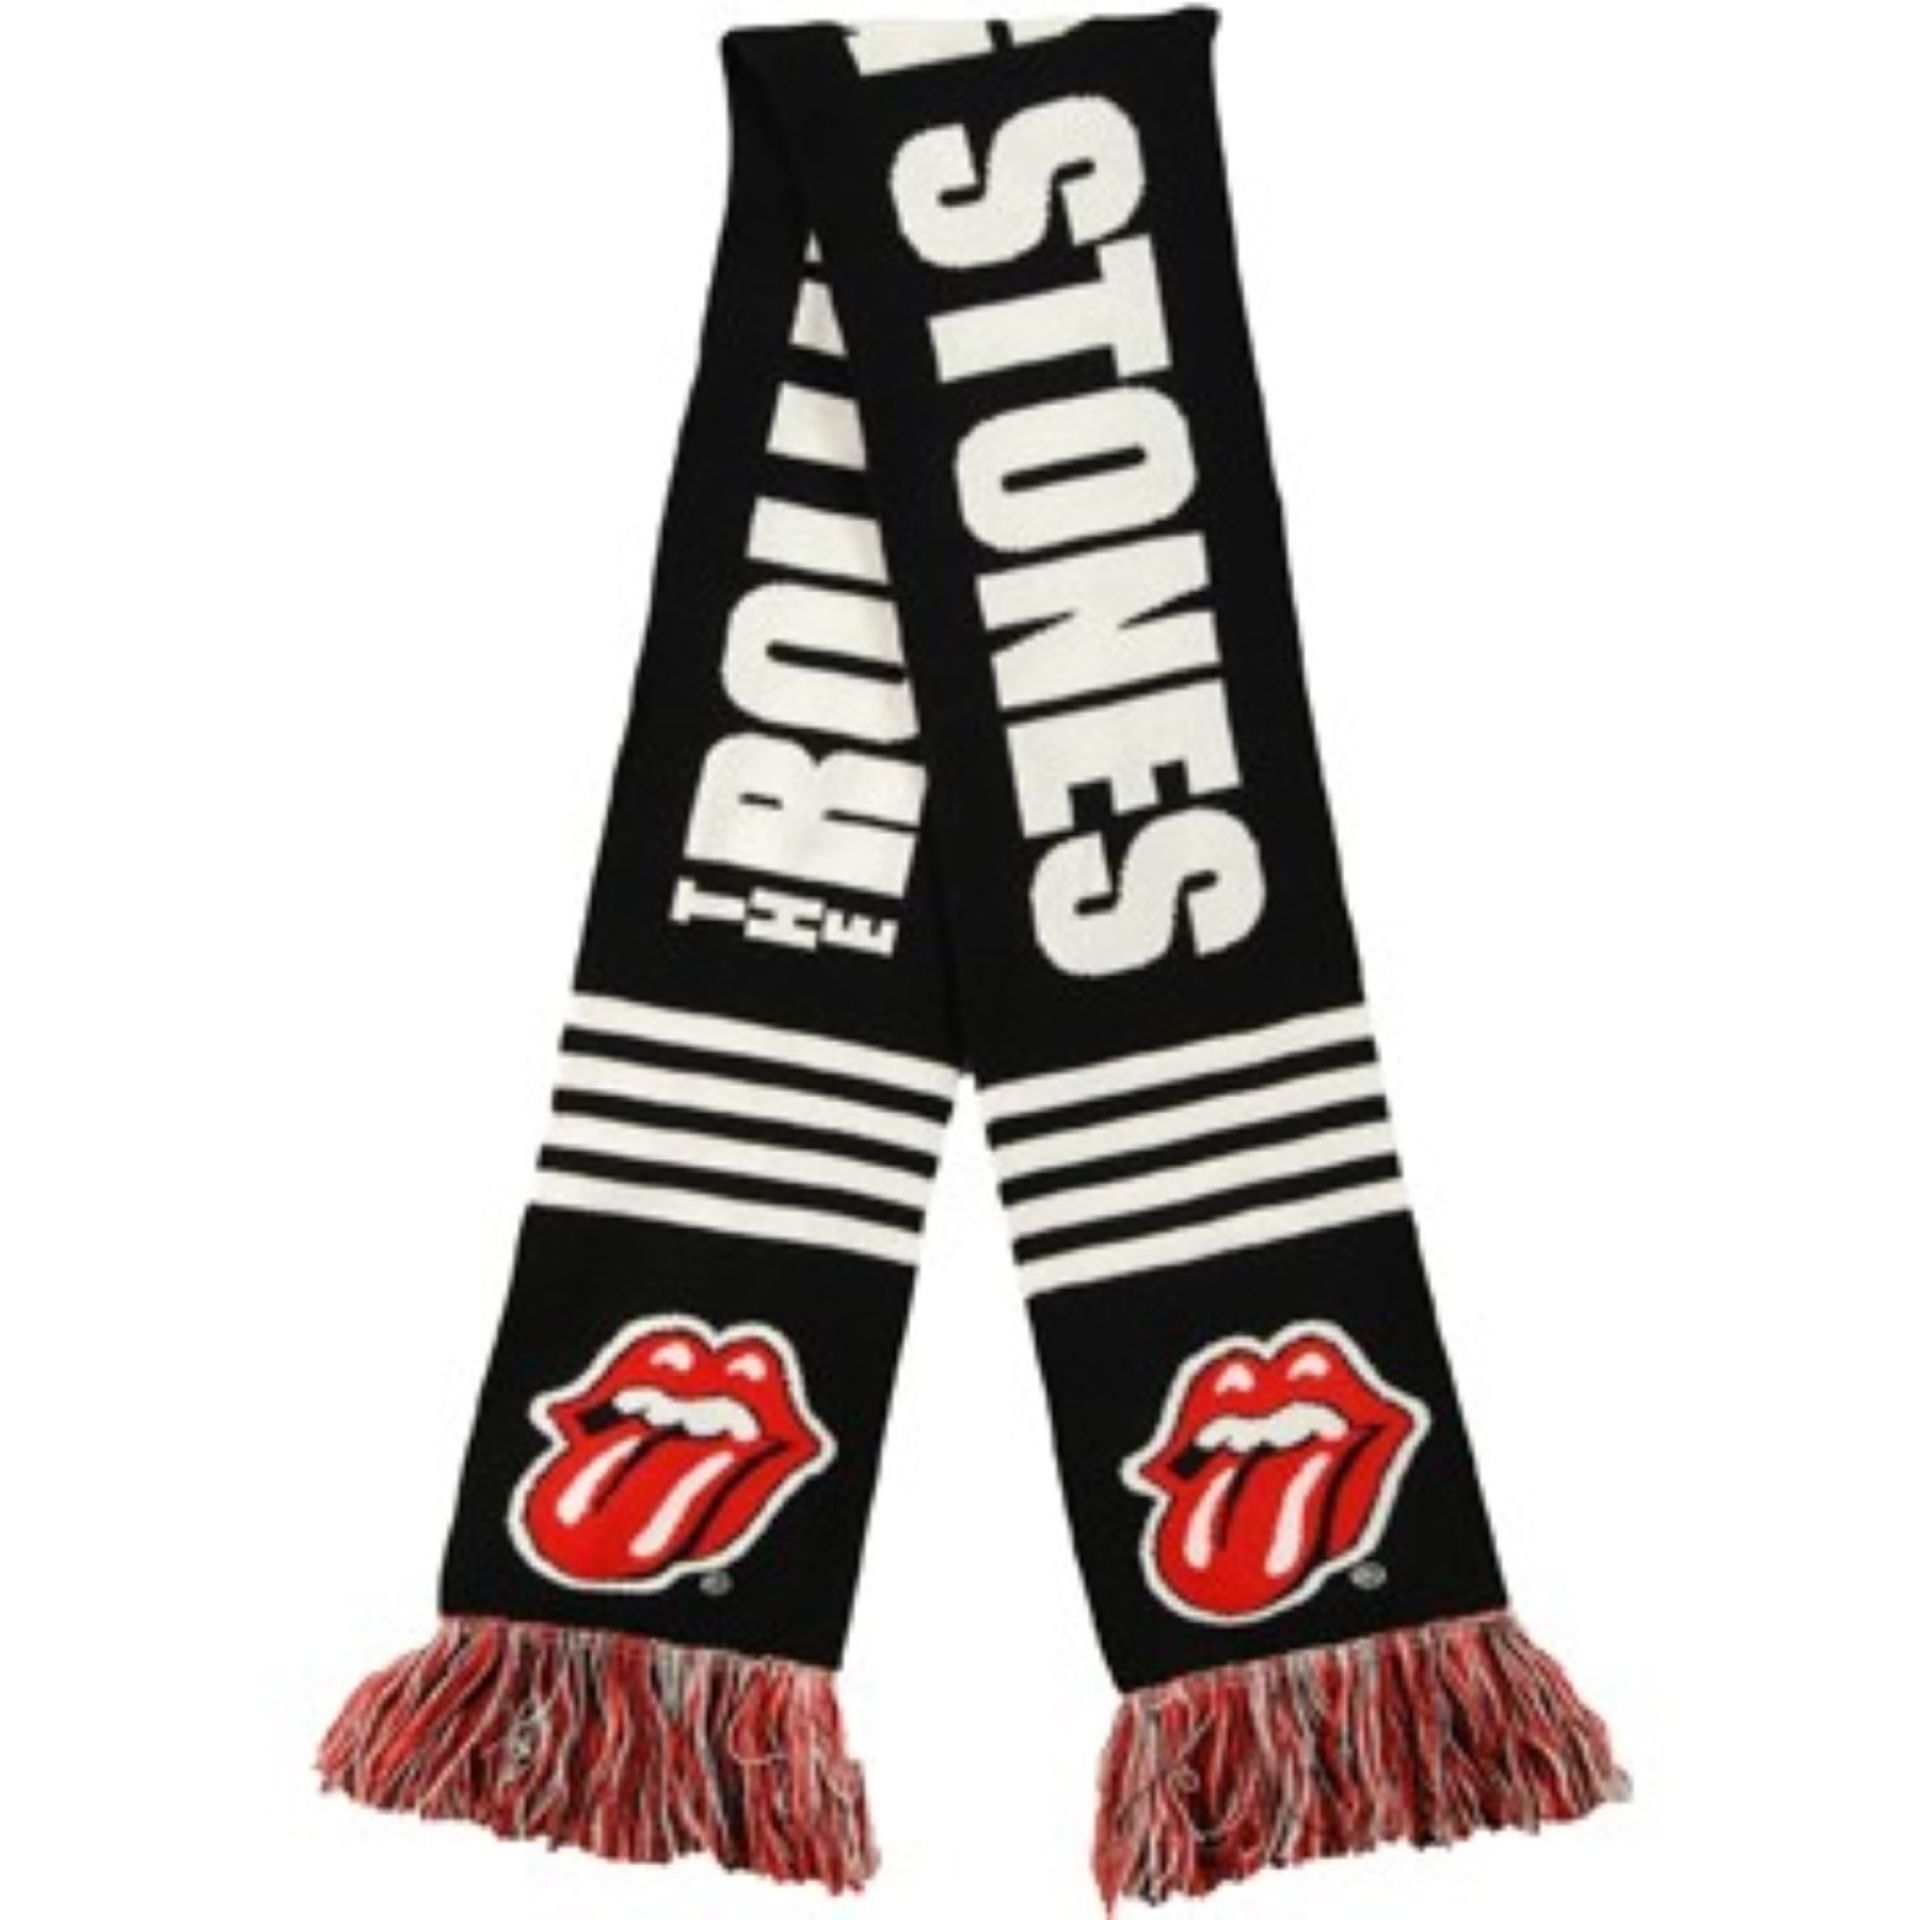 1 x Rolling Stones Scarf - Classic Tongue and Logo Design - Officially Licensed Merchandise - New &